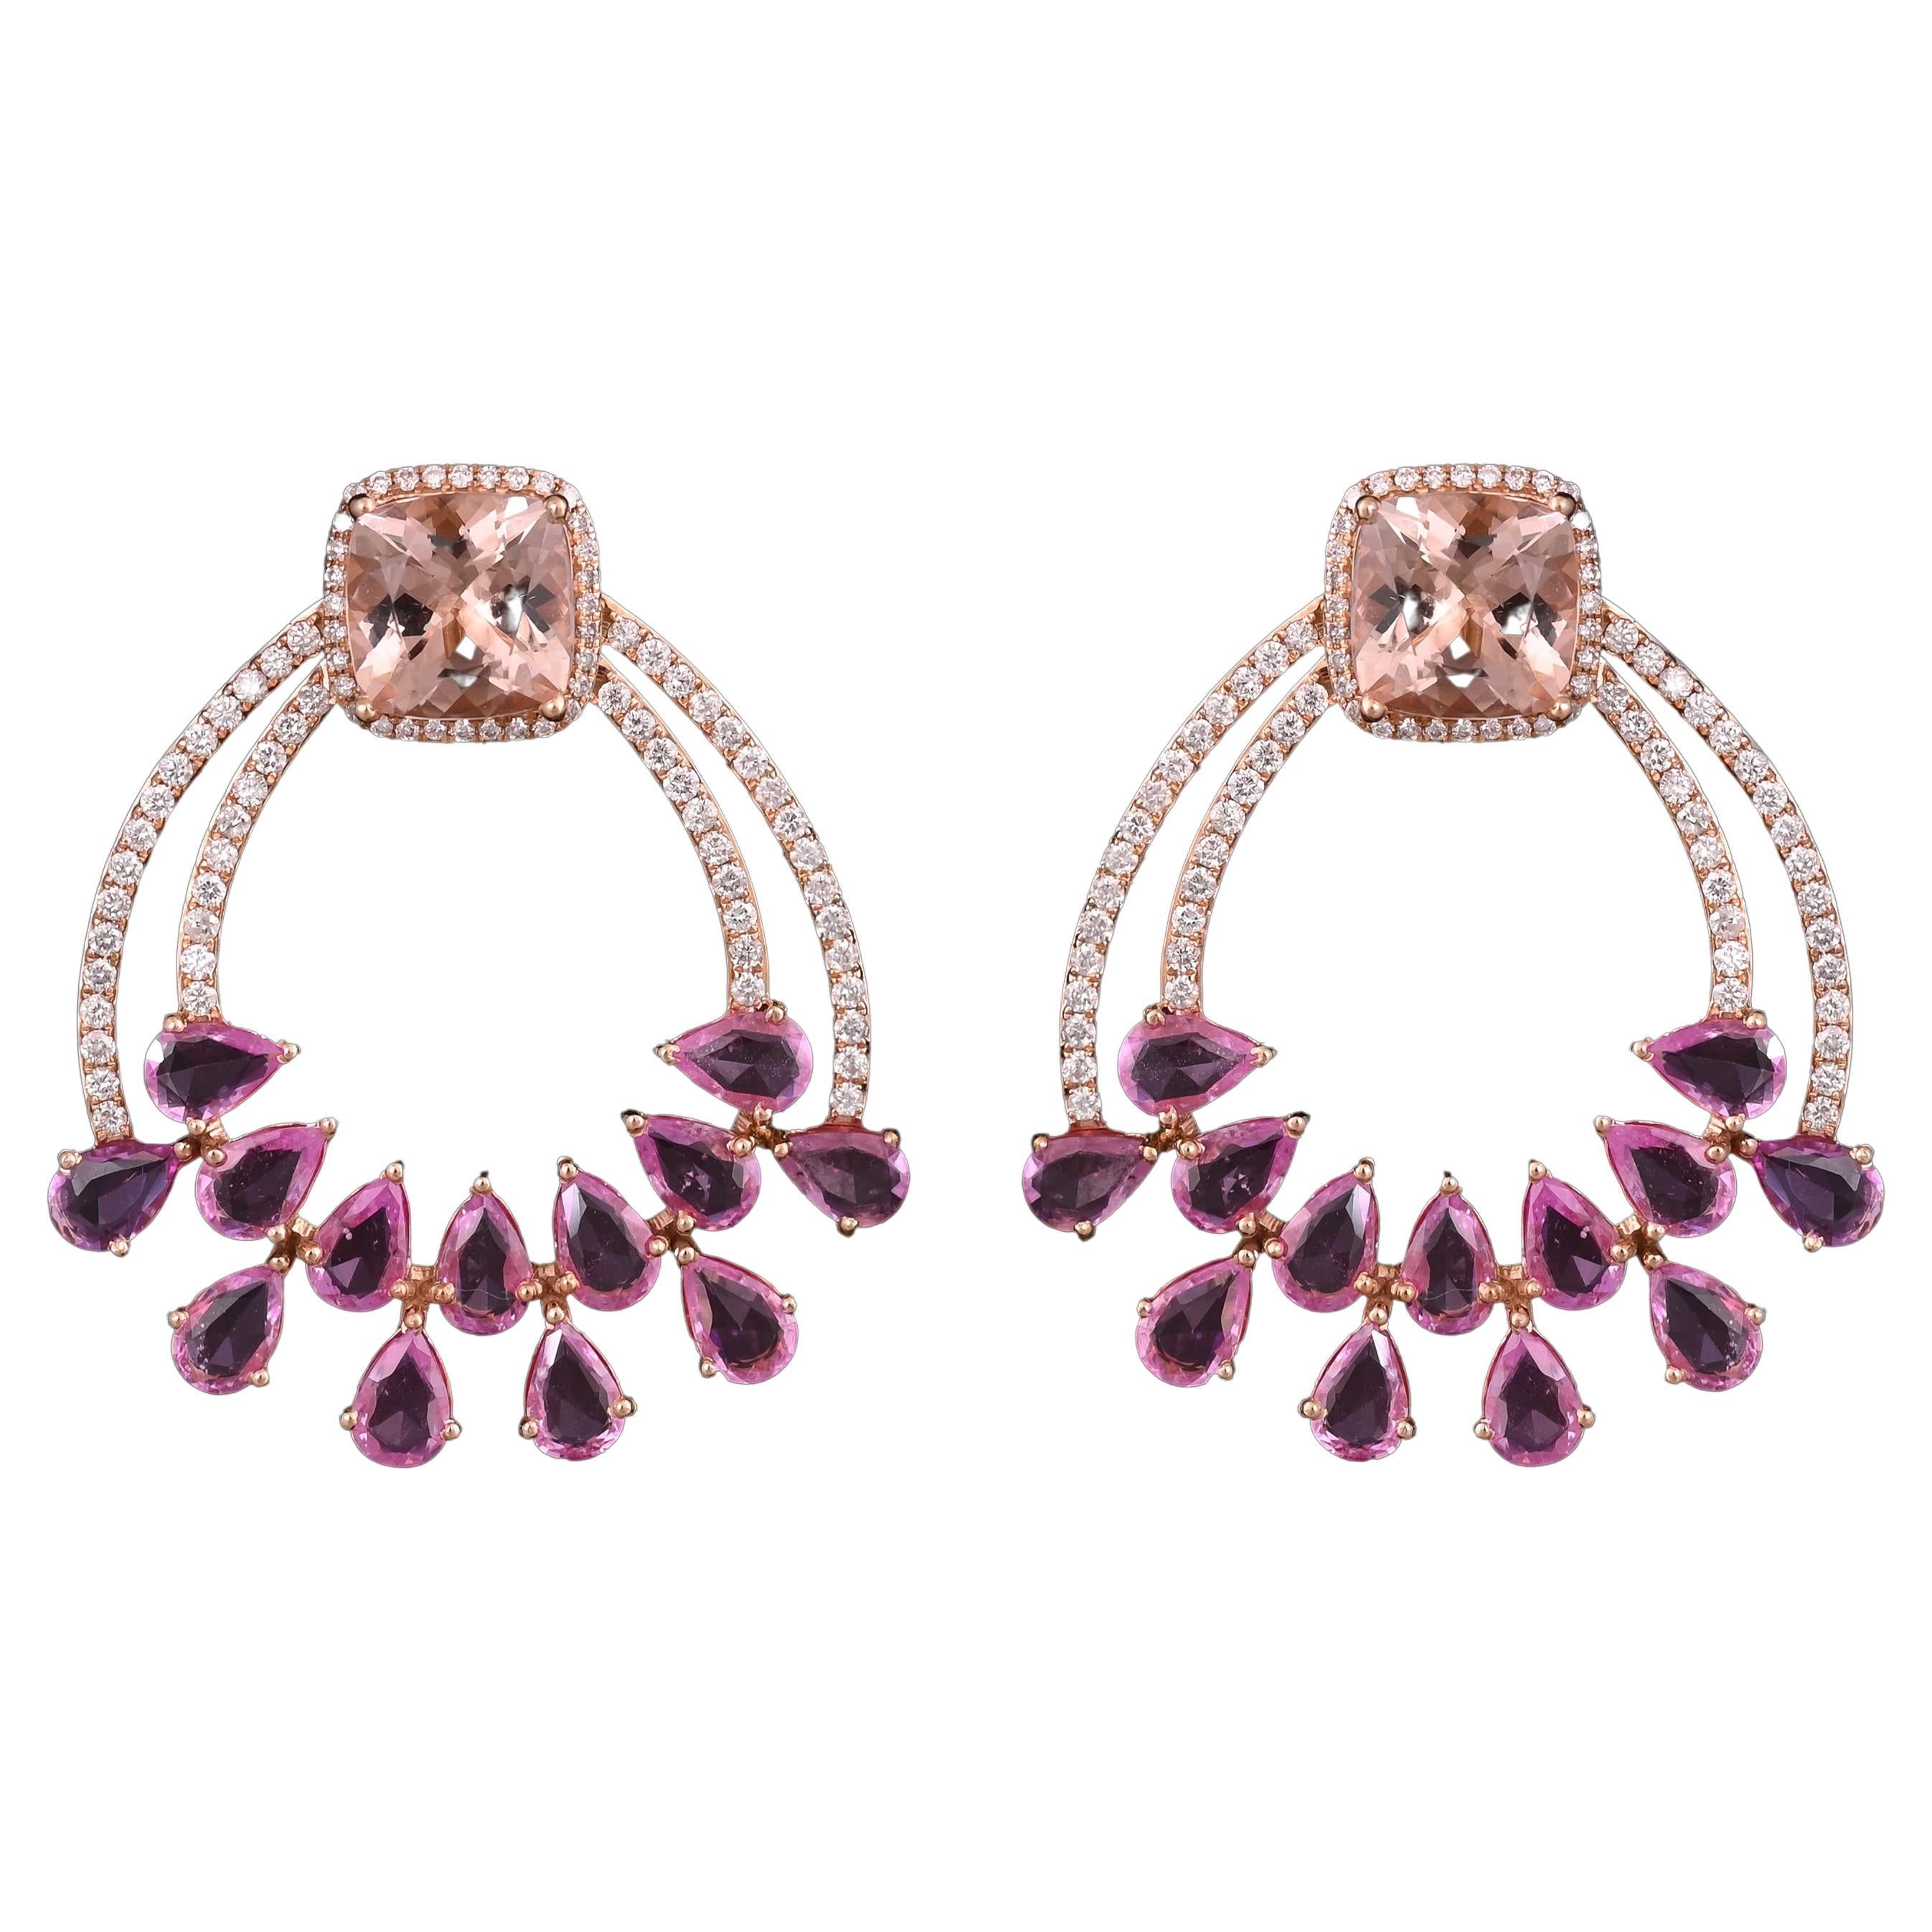 5.59 Carats Morganite, 7.69 Carats Pink Sapphires & Diamonds Chandelier Earrings For Sale